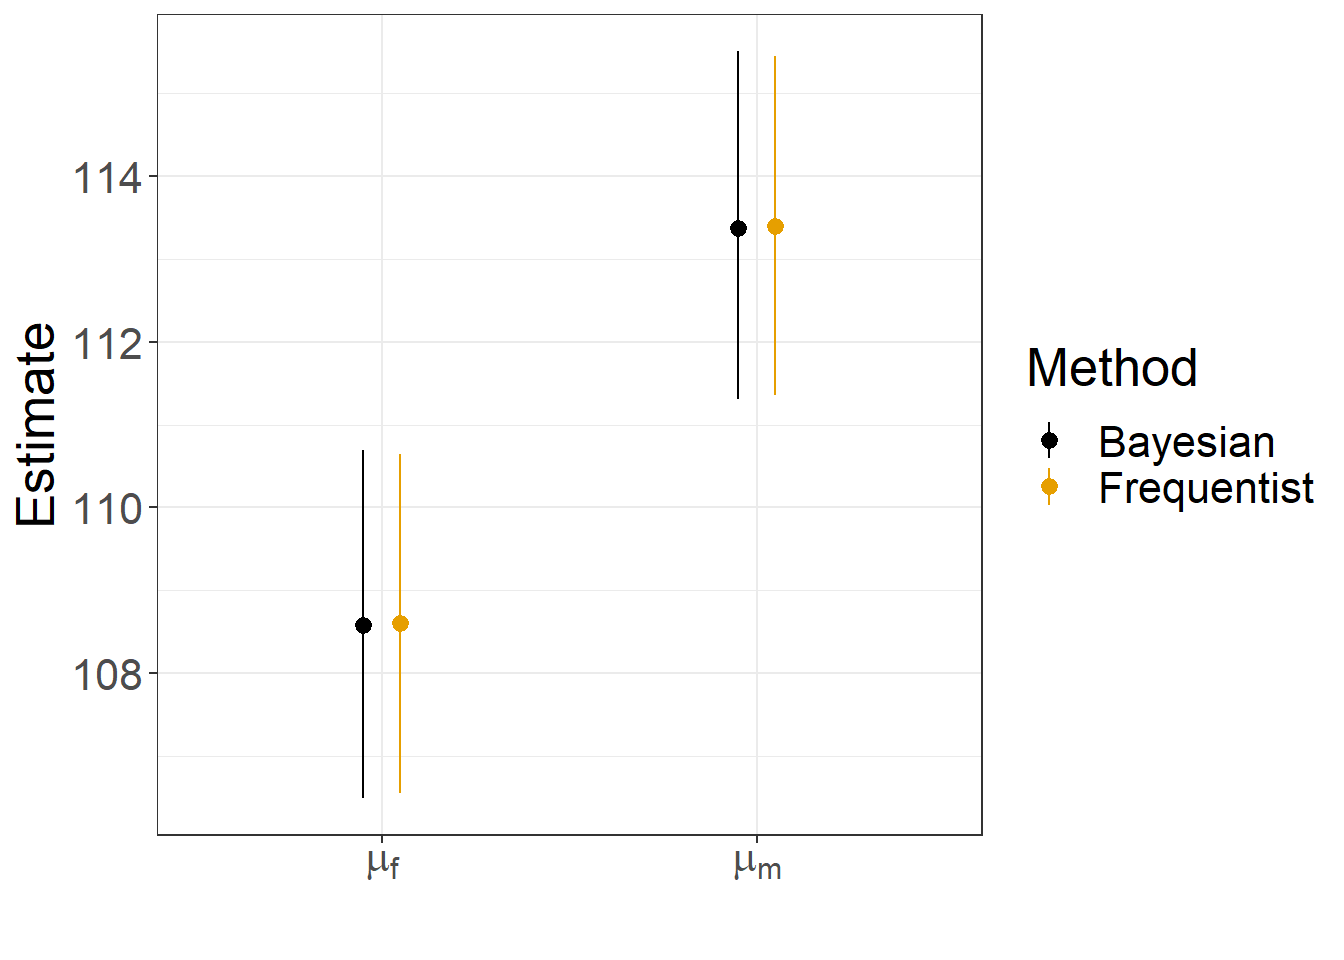 Comparison of frequentist and Bayesian estimates and confidence/credible intervals for the mean jaw length of male and female jackals.